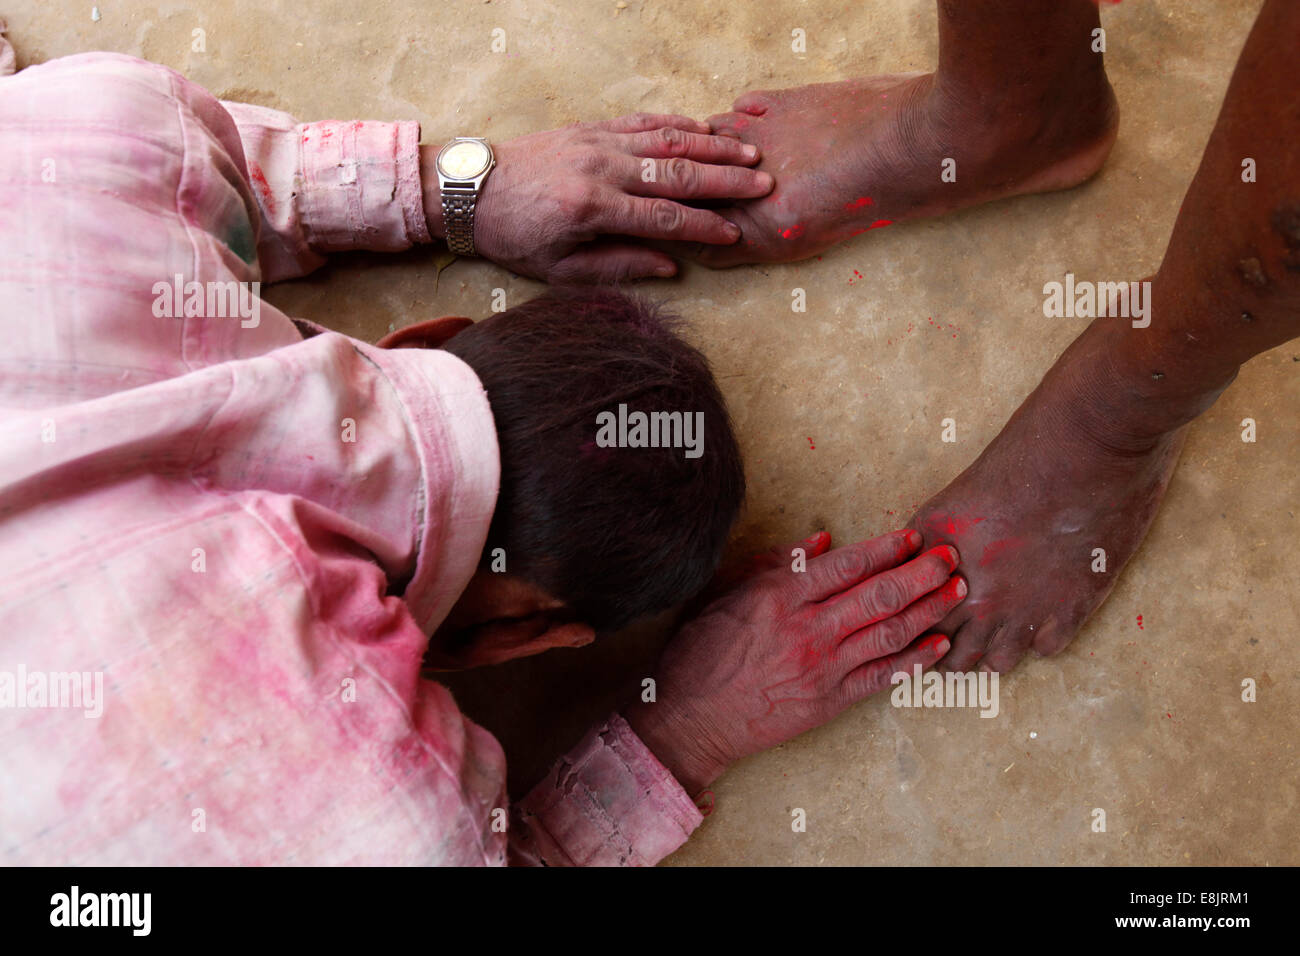 Hindu touching a holy man's feet as a sign of respect Stock Photo